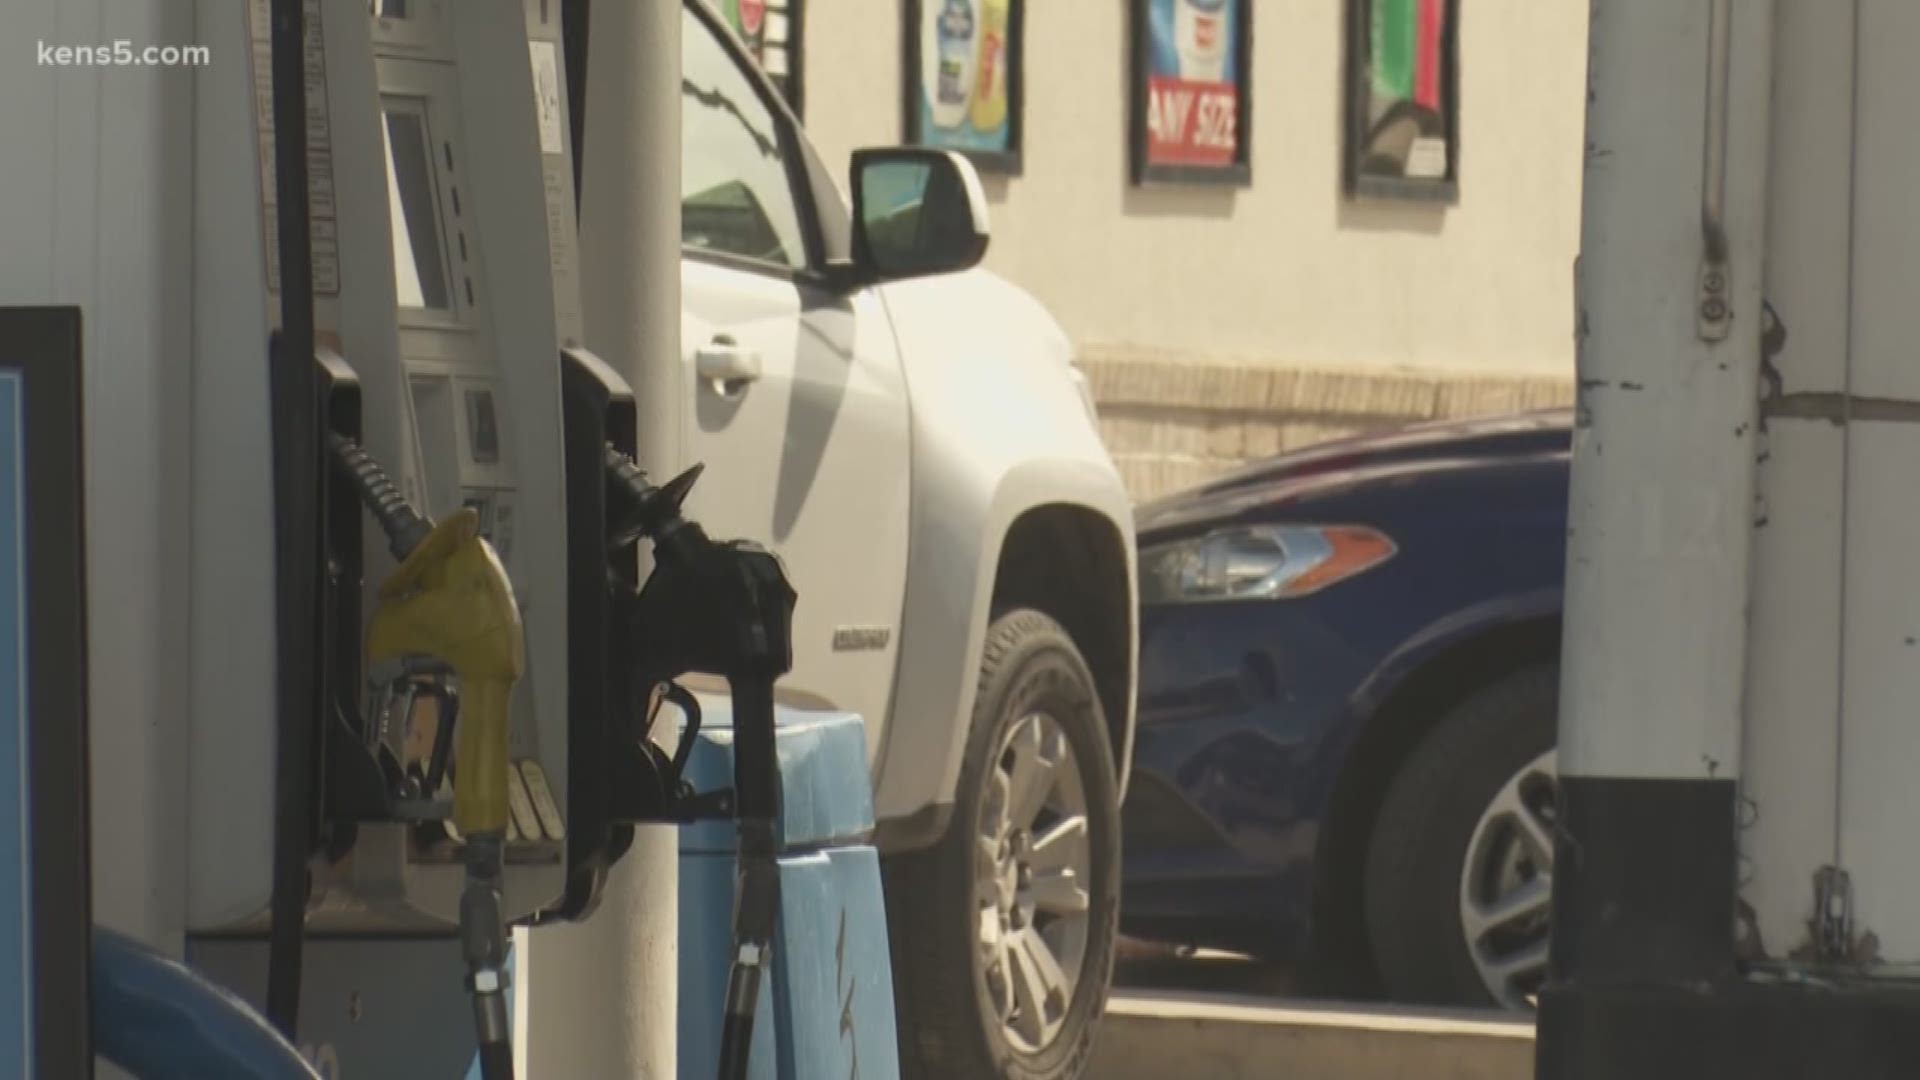 KENS 5 routinely requests where credit card skimmers are discovered, but a law that recently took effect may now prevent them from sharing that data.